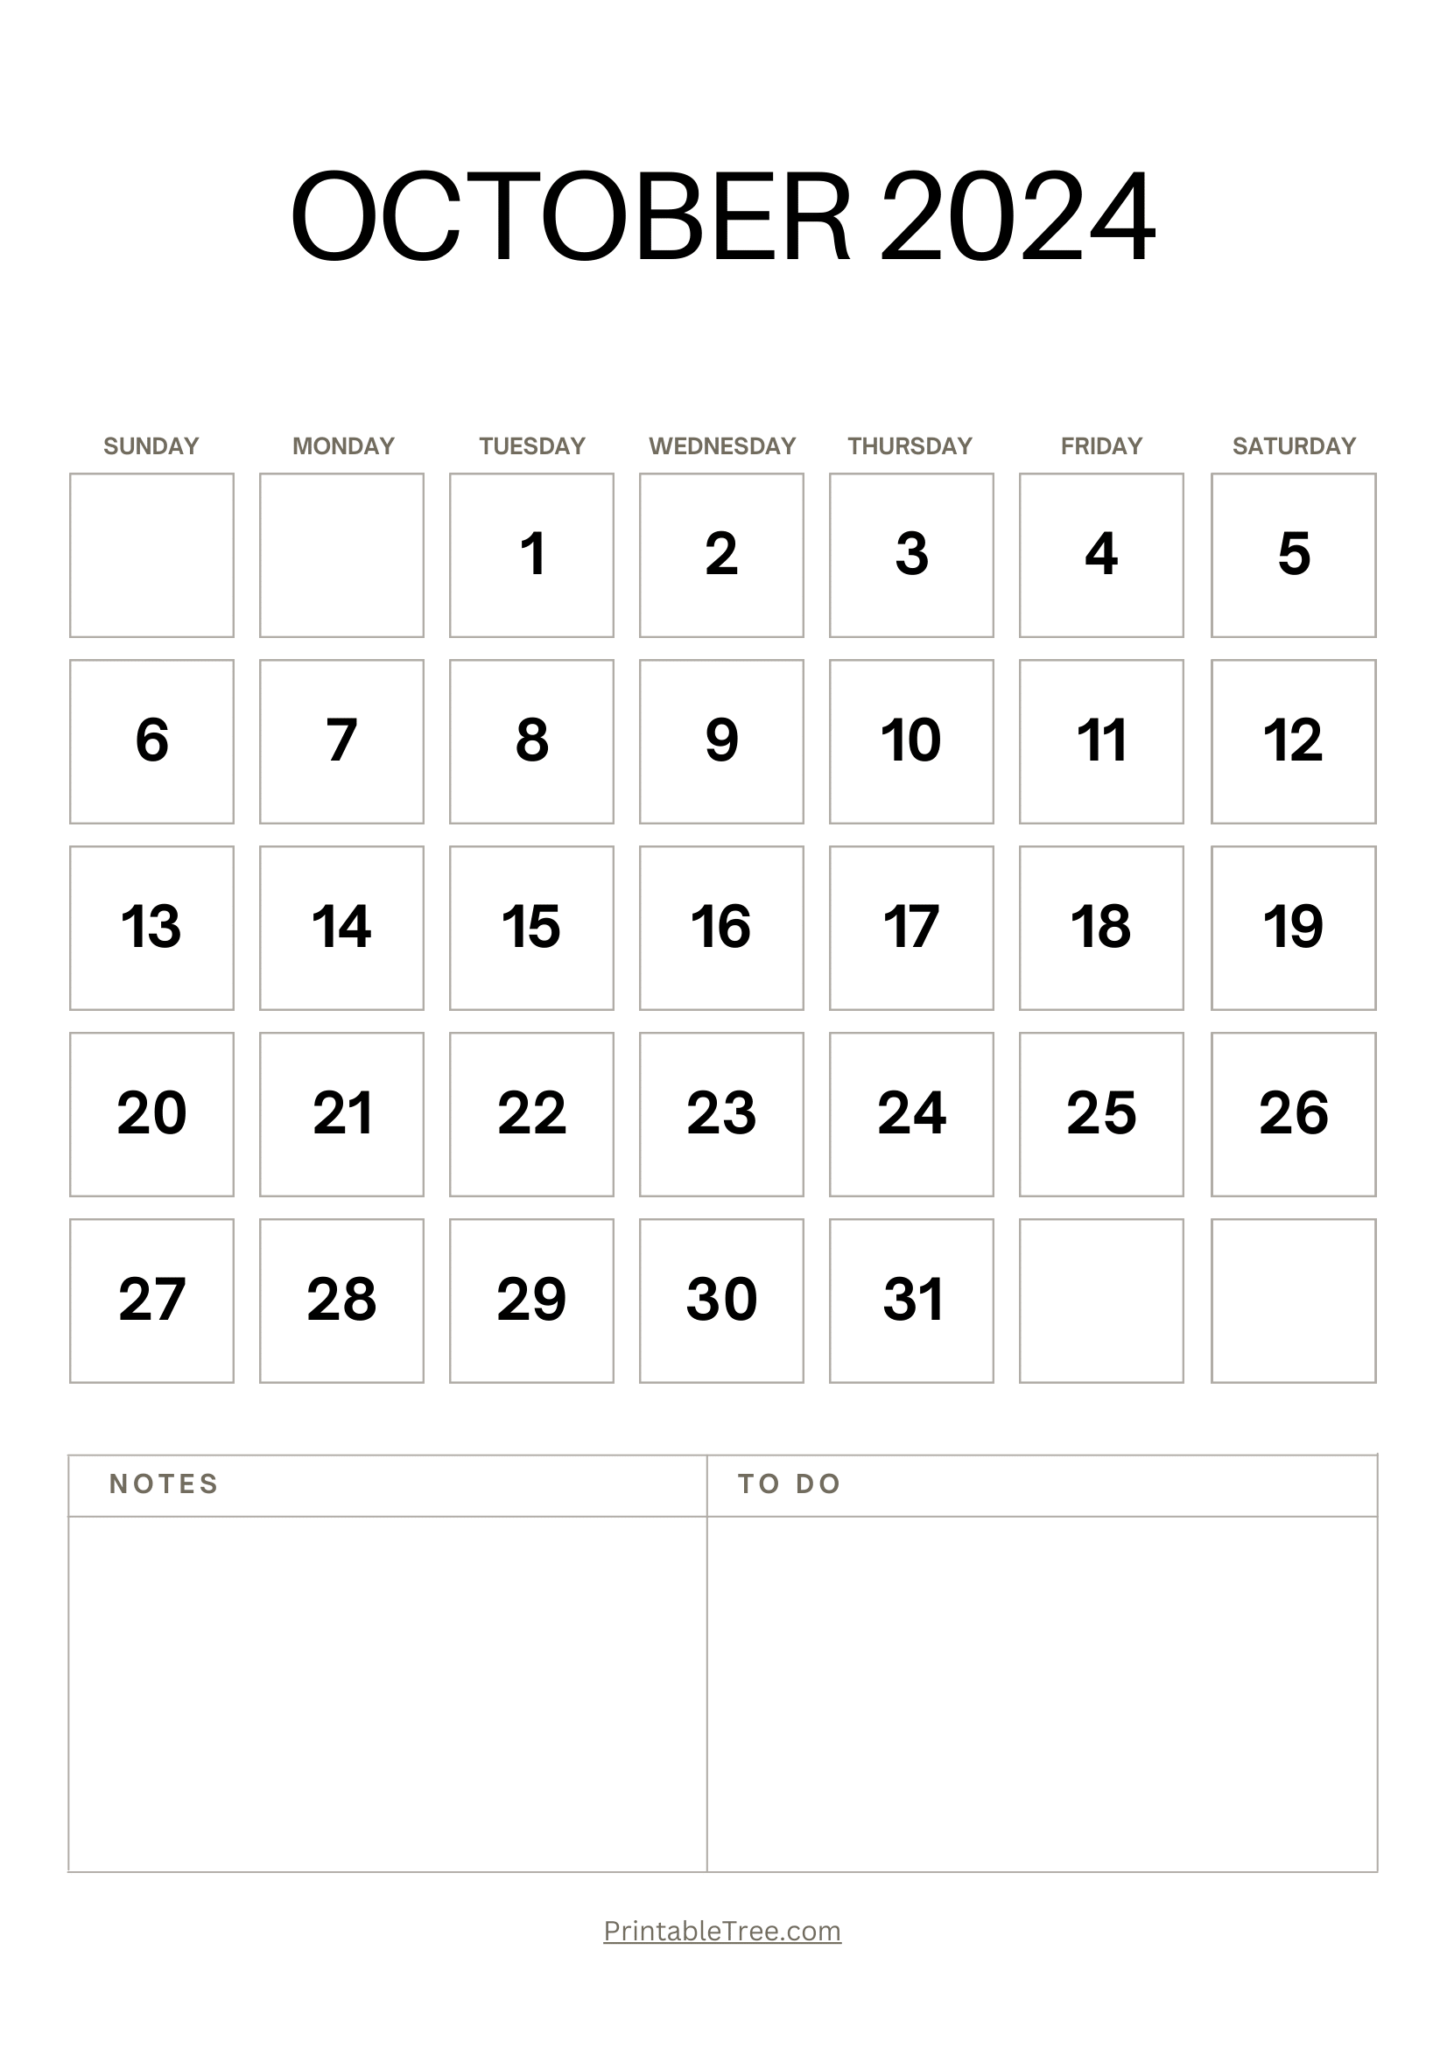 printable-october-2024-calendar-box-and-lines-for-notes-free-calendar-template